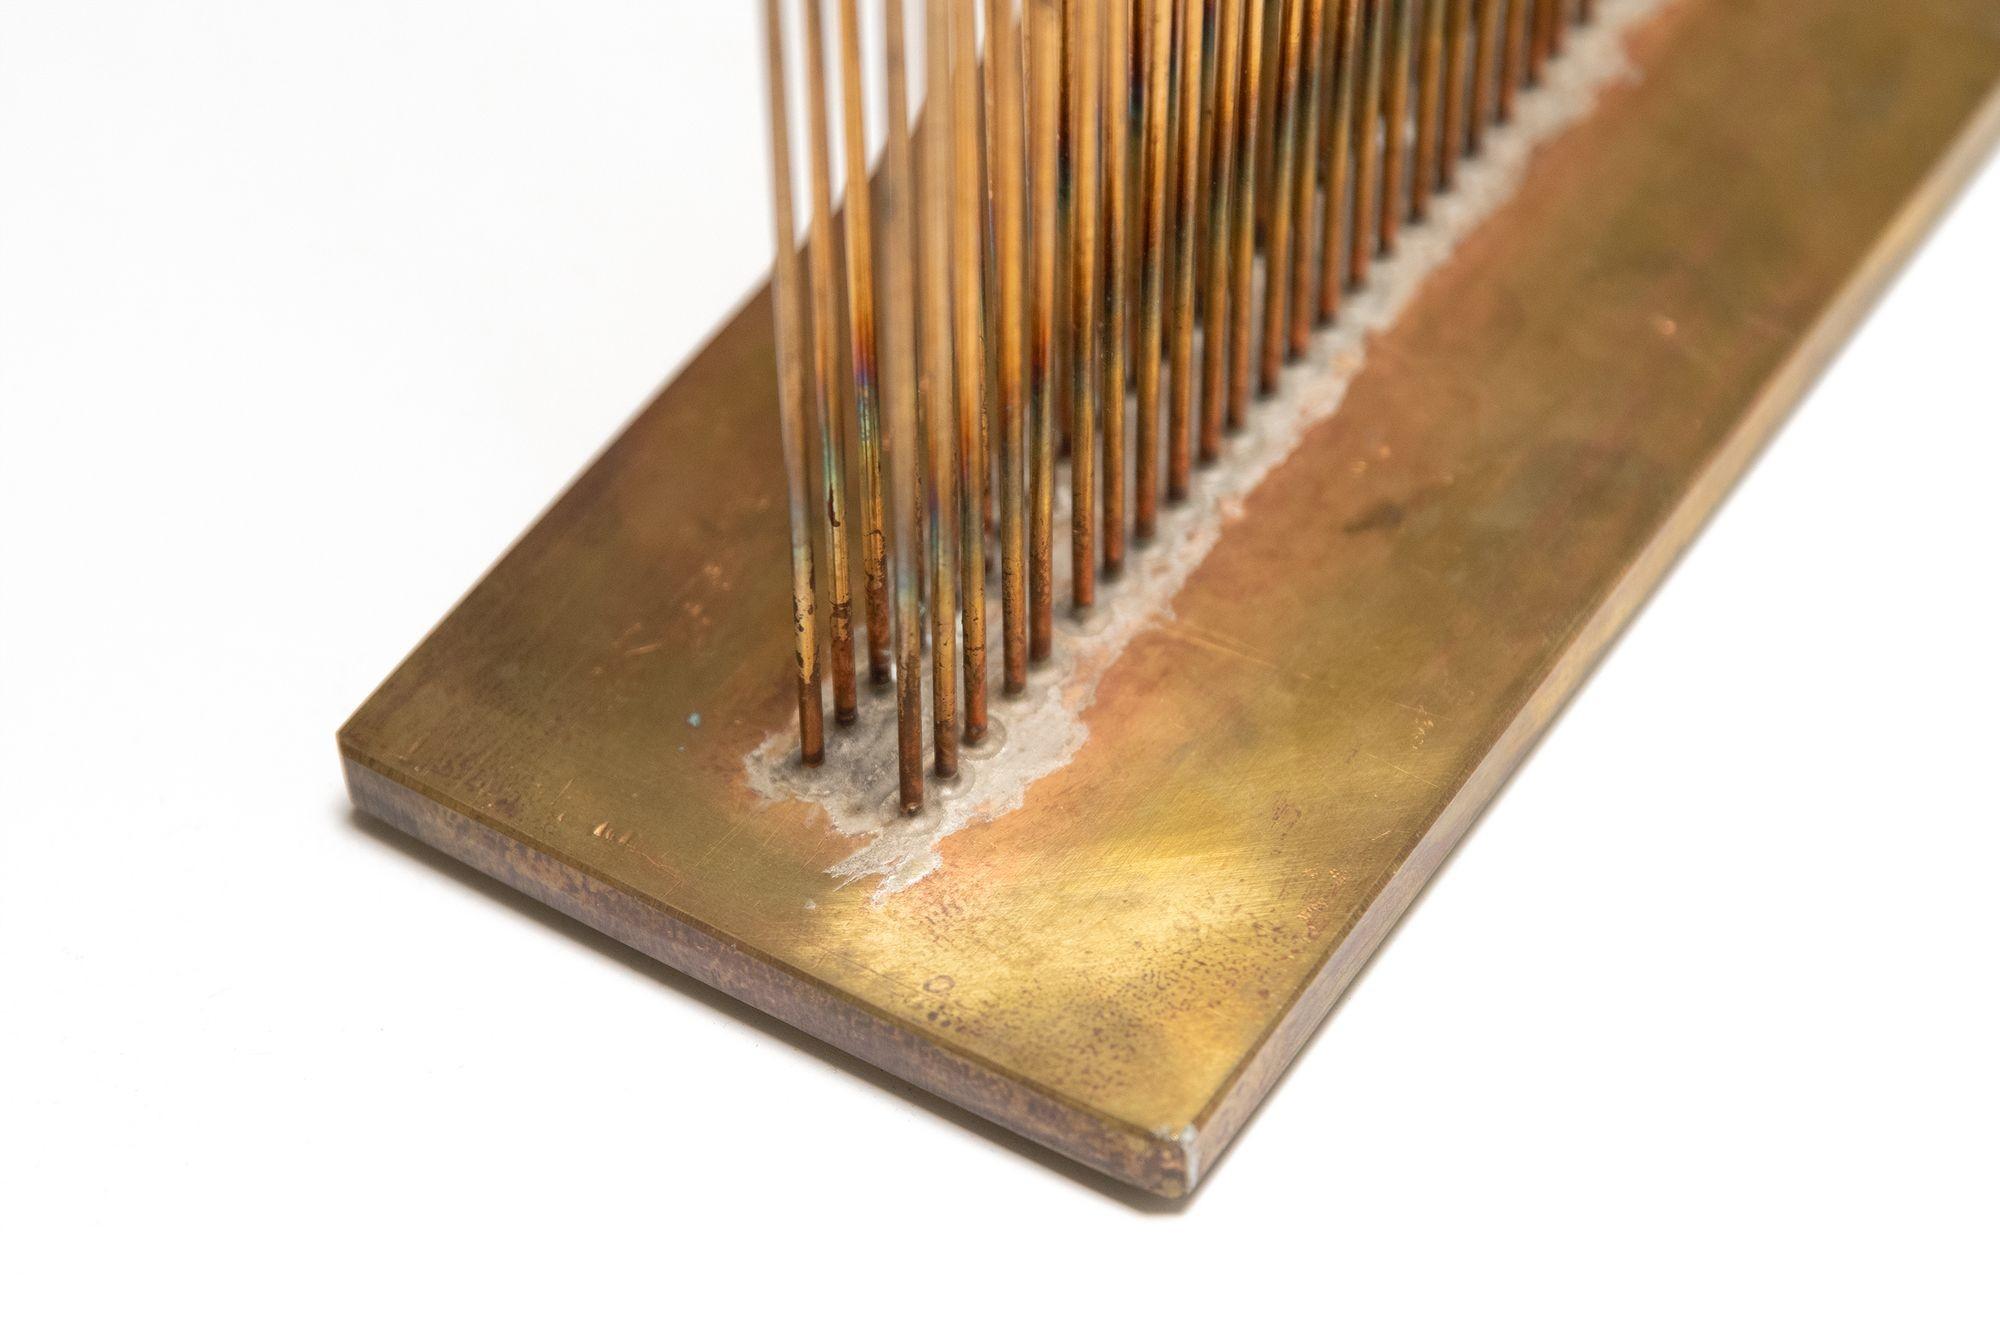 Val Bertoia 'Sound of V' Sonambient Sculpture Silicon Bronze Rods in Brass Base For Sale 1